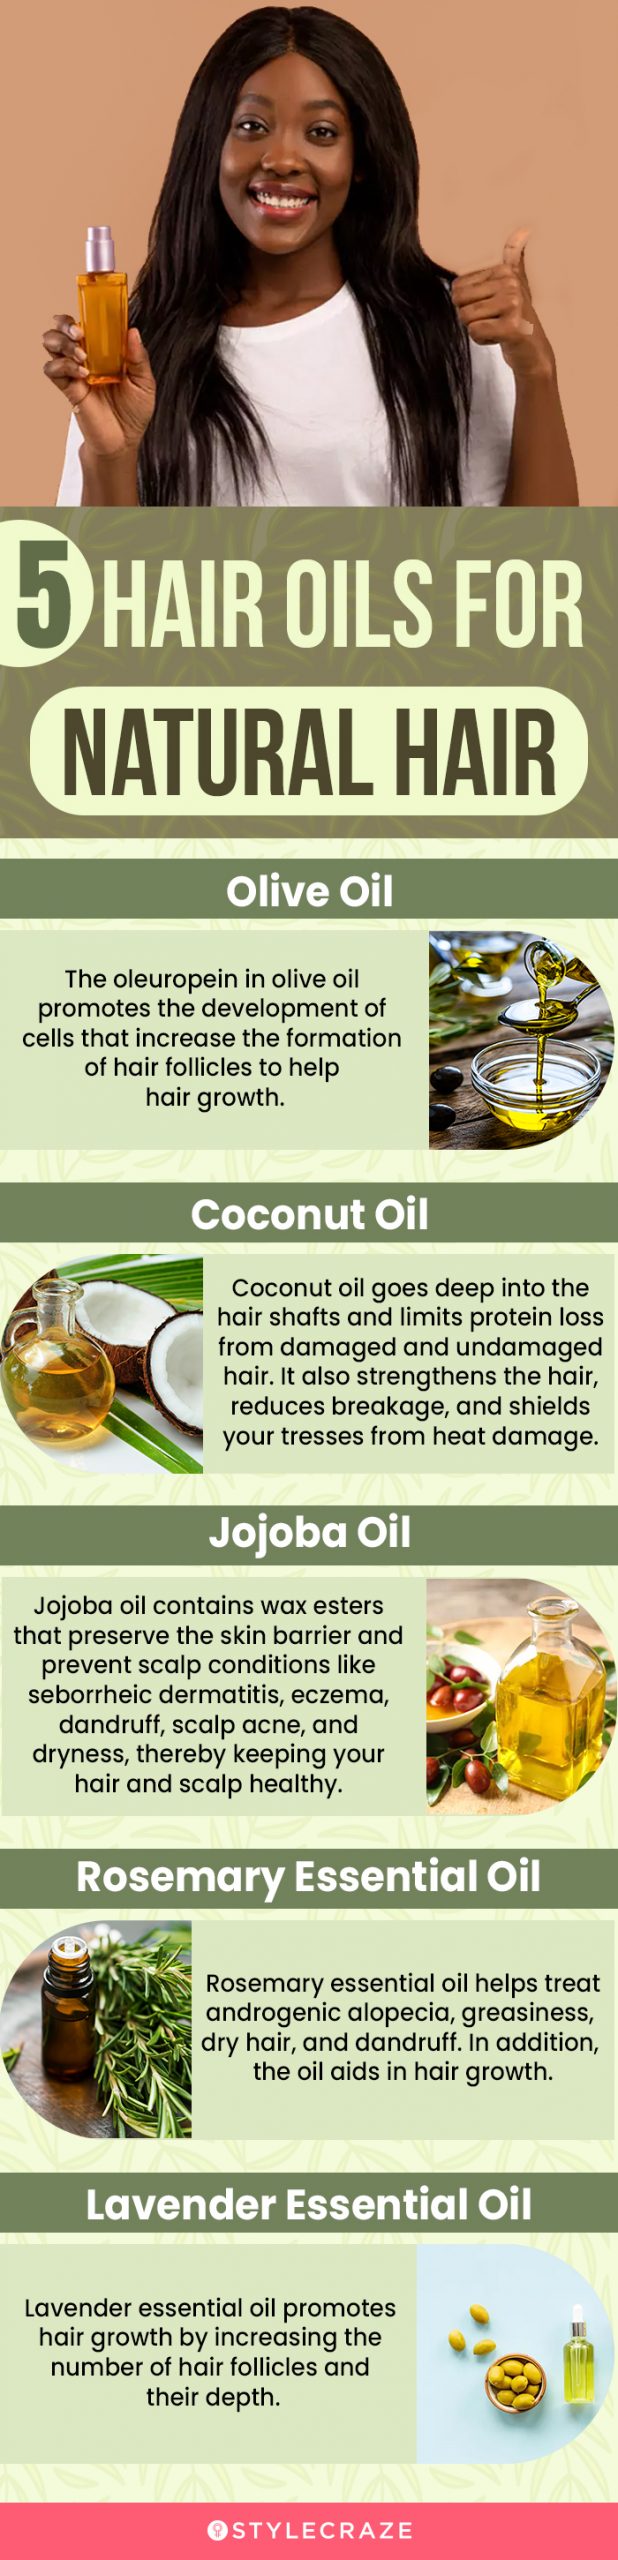 5 hair oils for natural hair (infographic)